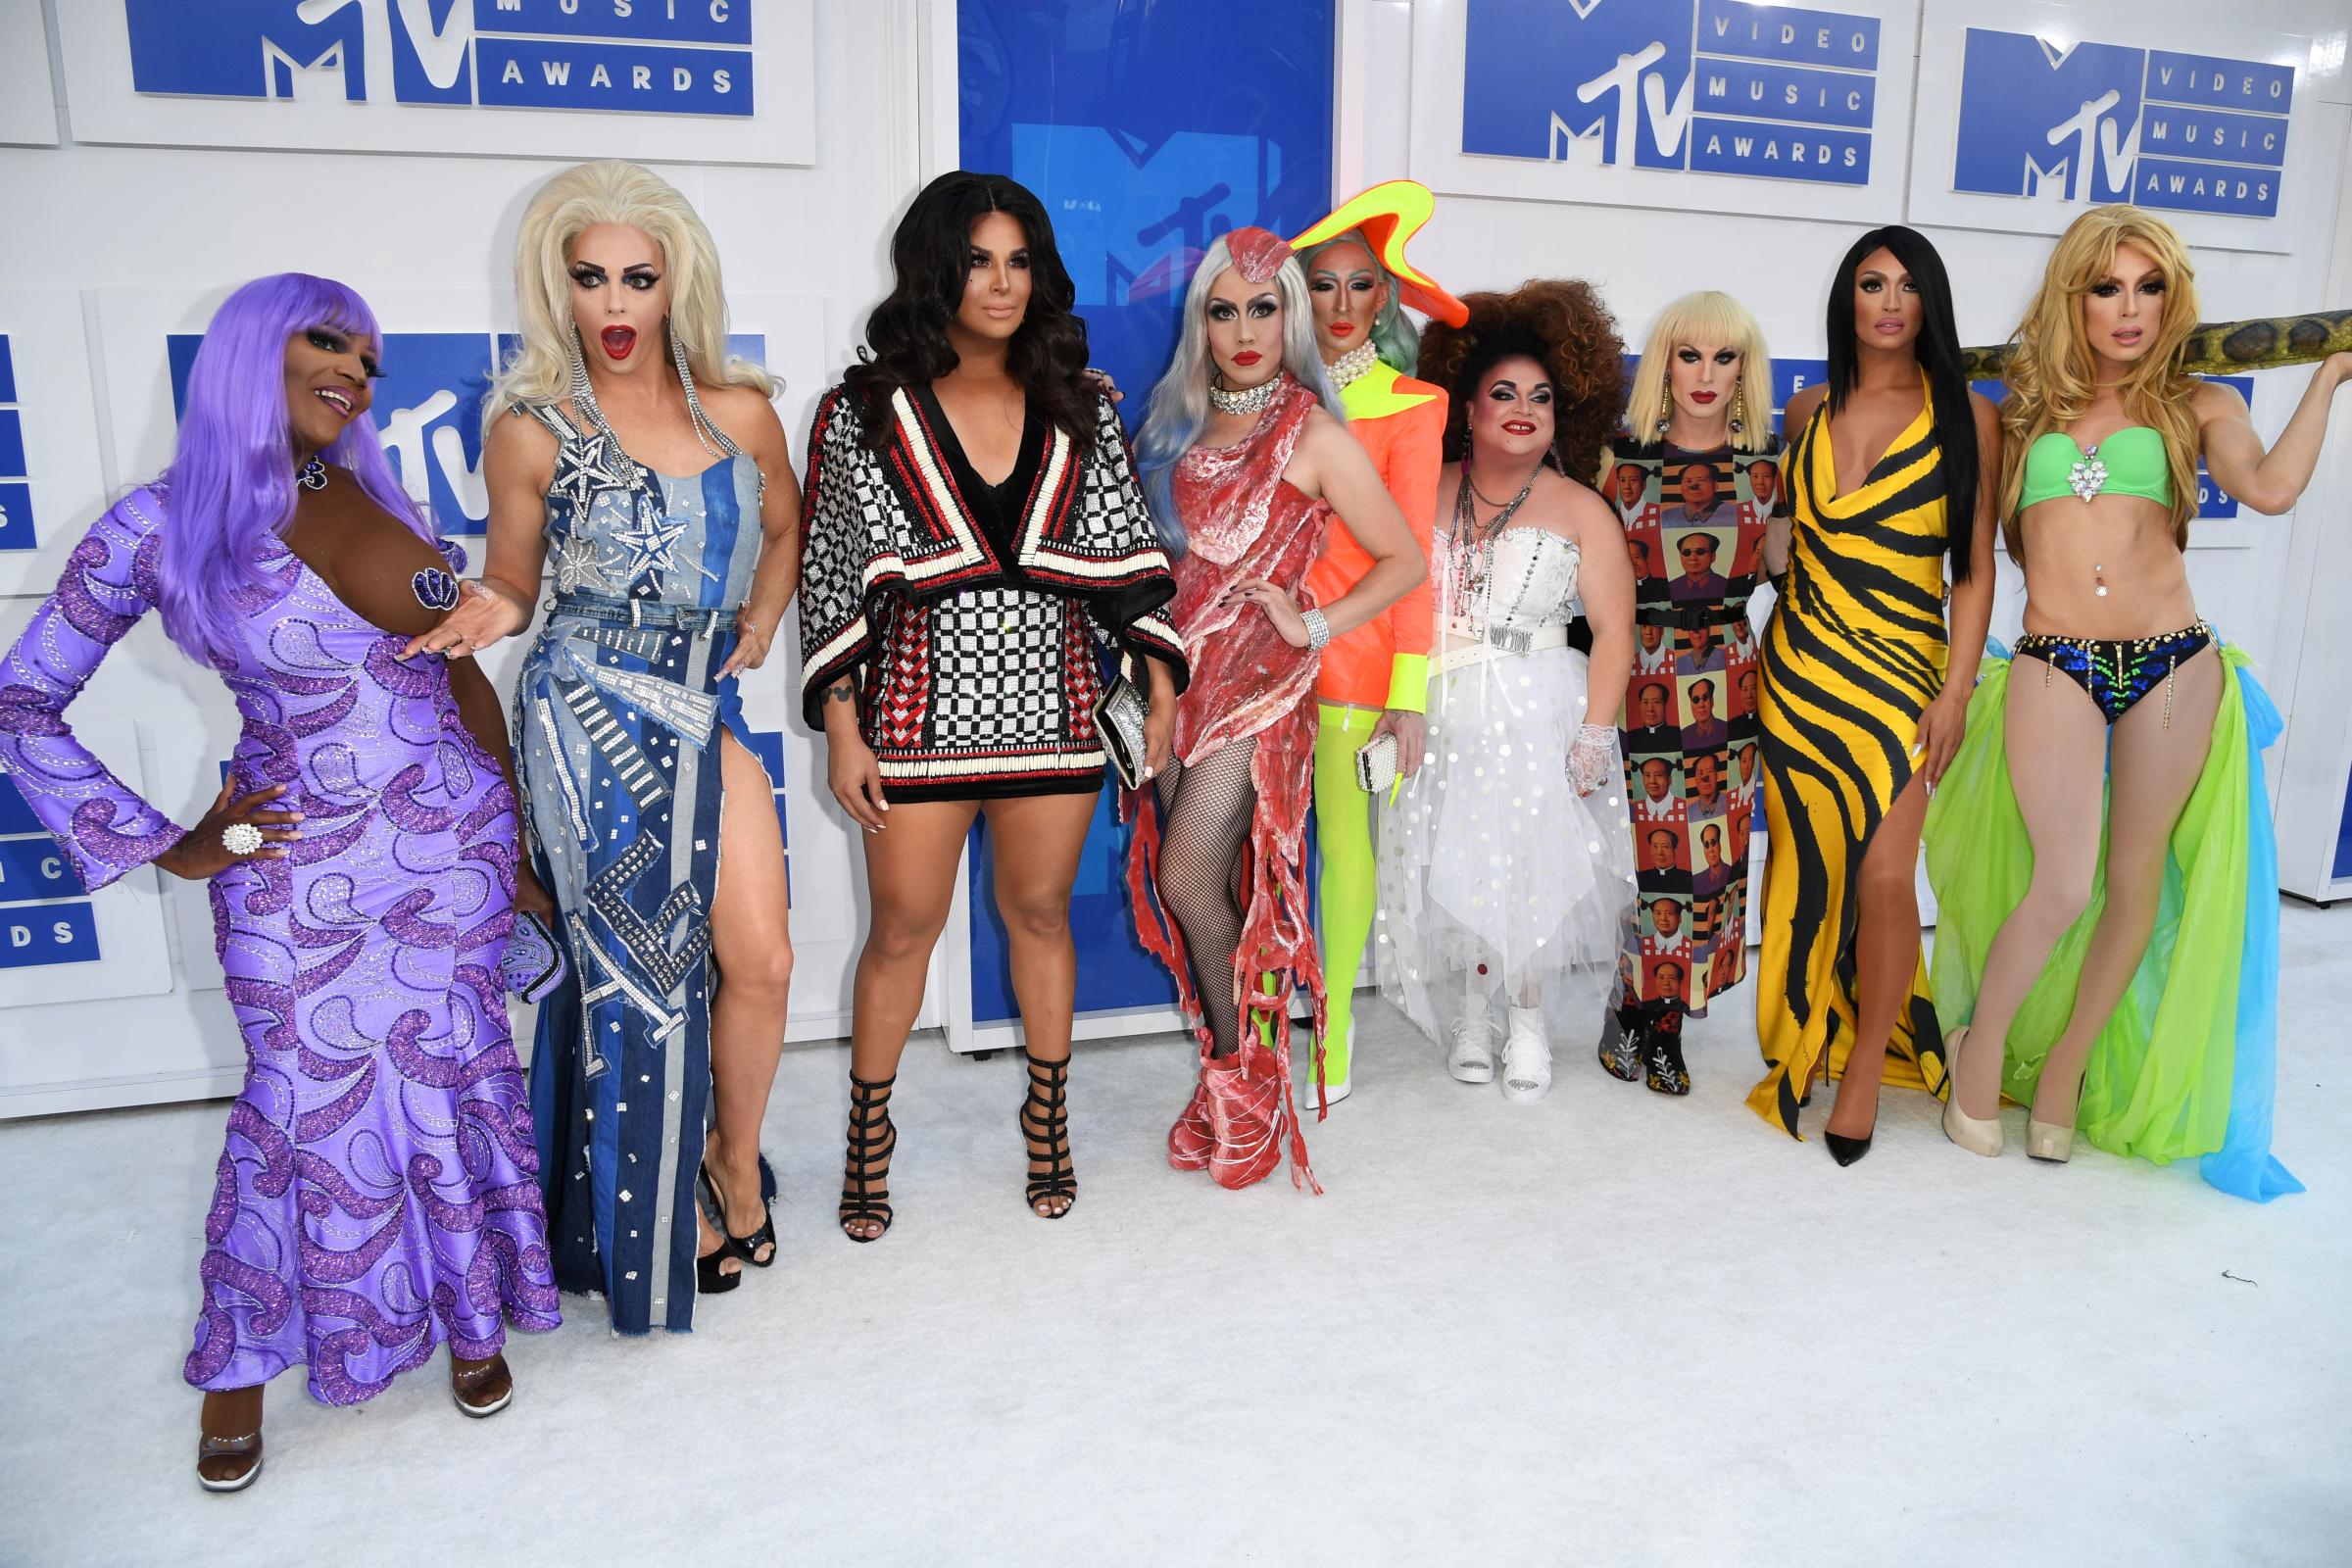 Rupaul's Drag Race All Stars attend the 2016 MTV Video Music Awards at Madison Square Garden on Aug. 28, 2016 in New York City.